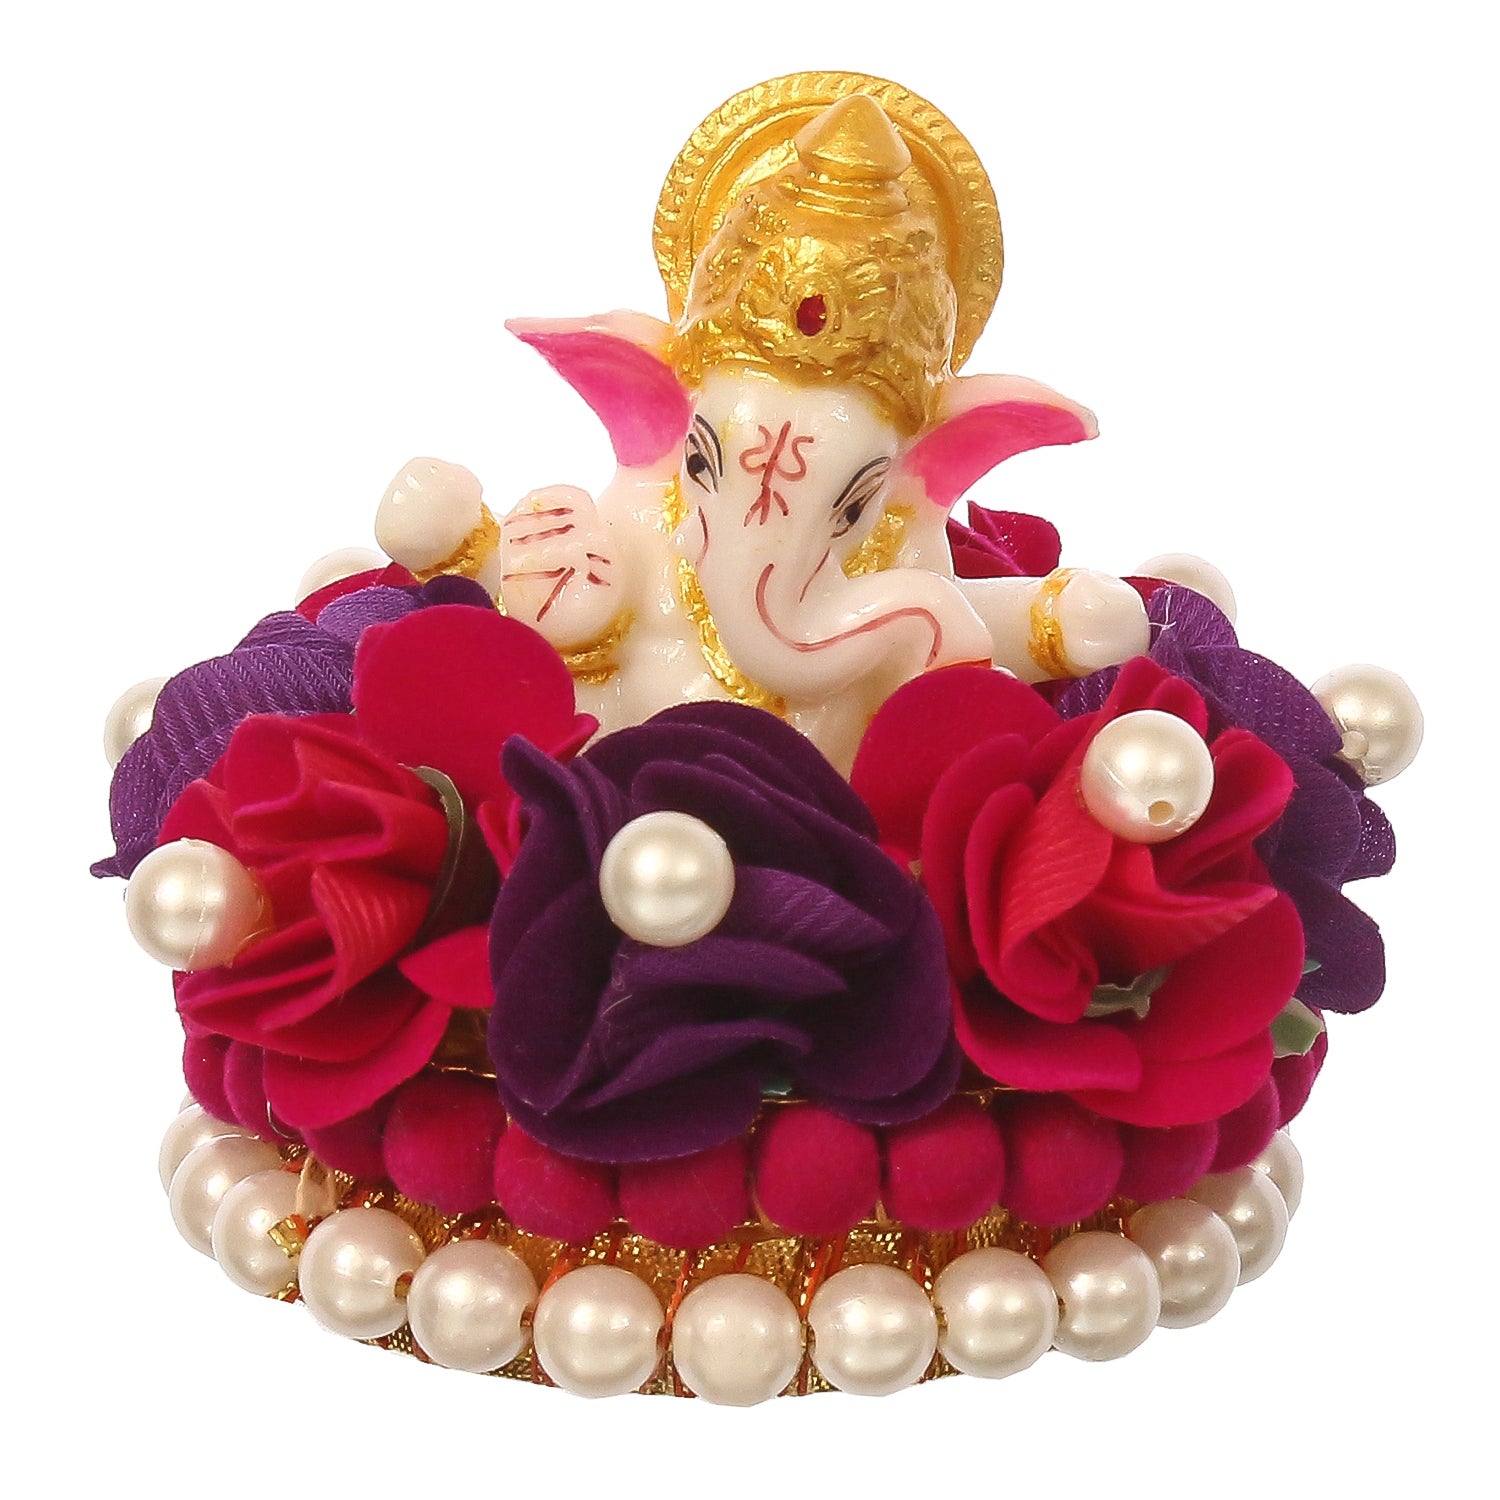 Lord Ganesha Idol On Decorative Handcrafted Red And Purple Flowers Plate 2